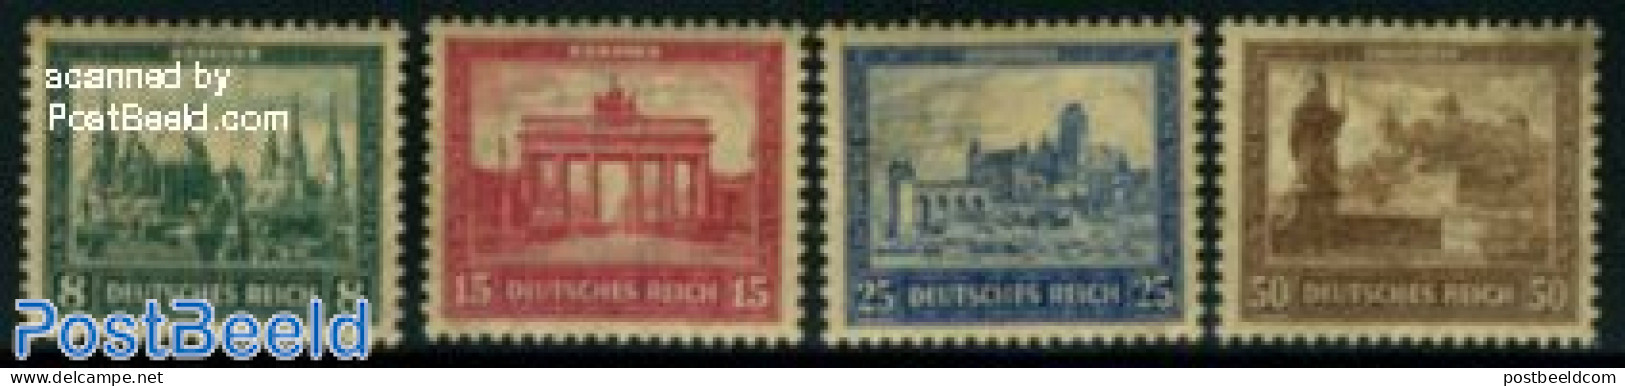 Germany, Empire 1931 Emergency Aid 4v, Mint NH, Art - Castles & Fortifications - Sculpture - Unused Stamps